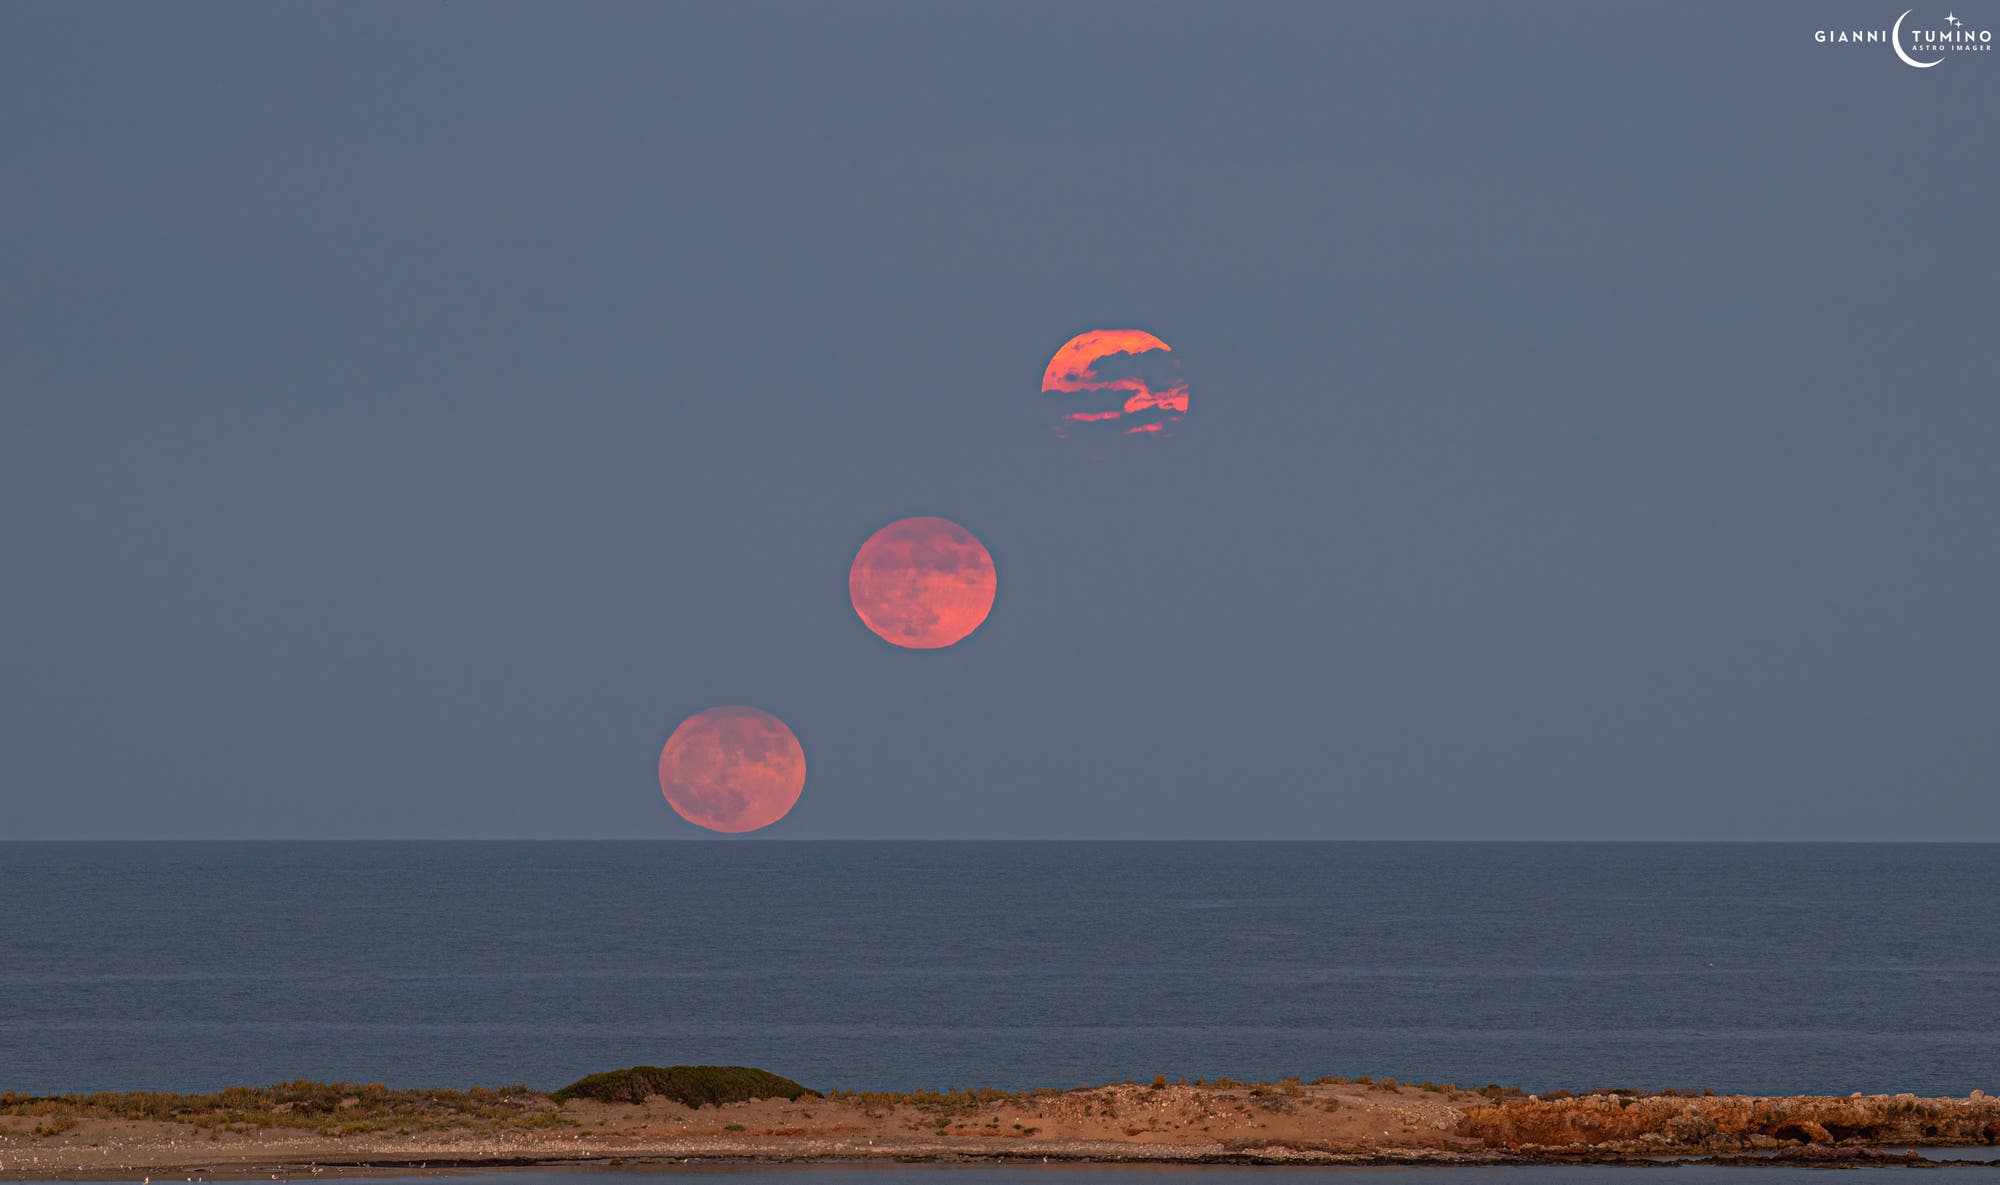 The full "Buck Moon" rising sequence